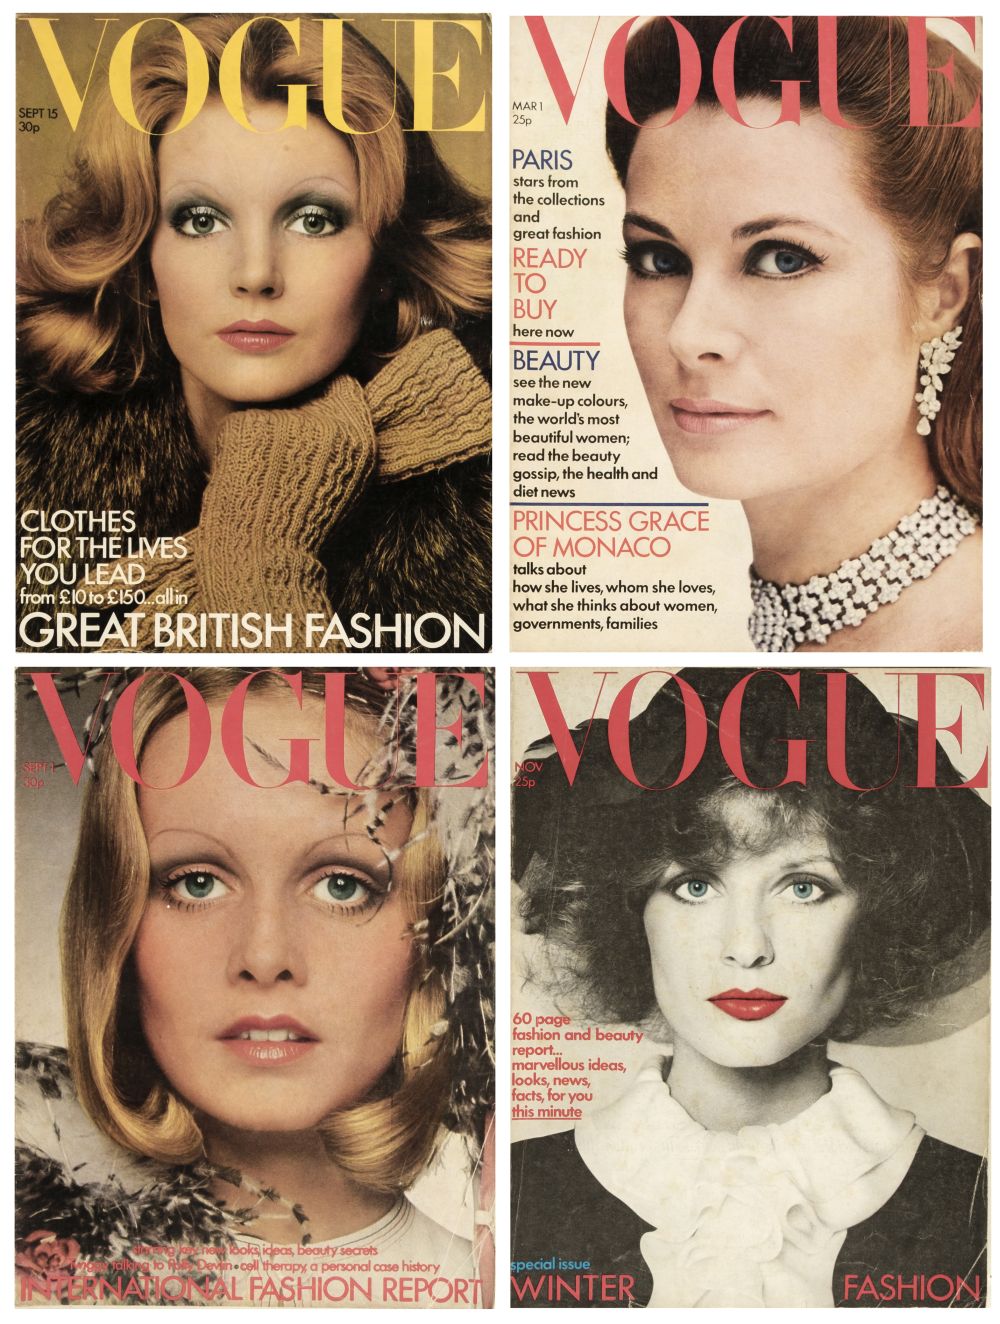 VogueA. A collection of approximately 185 UK issues of Vogue magazine, 1970s/1980s